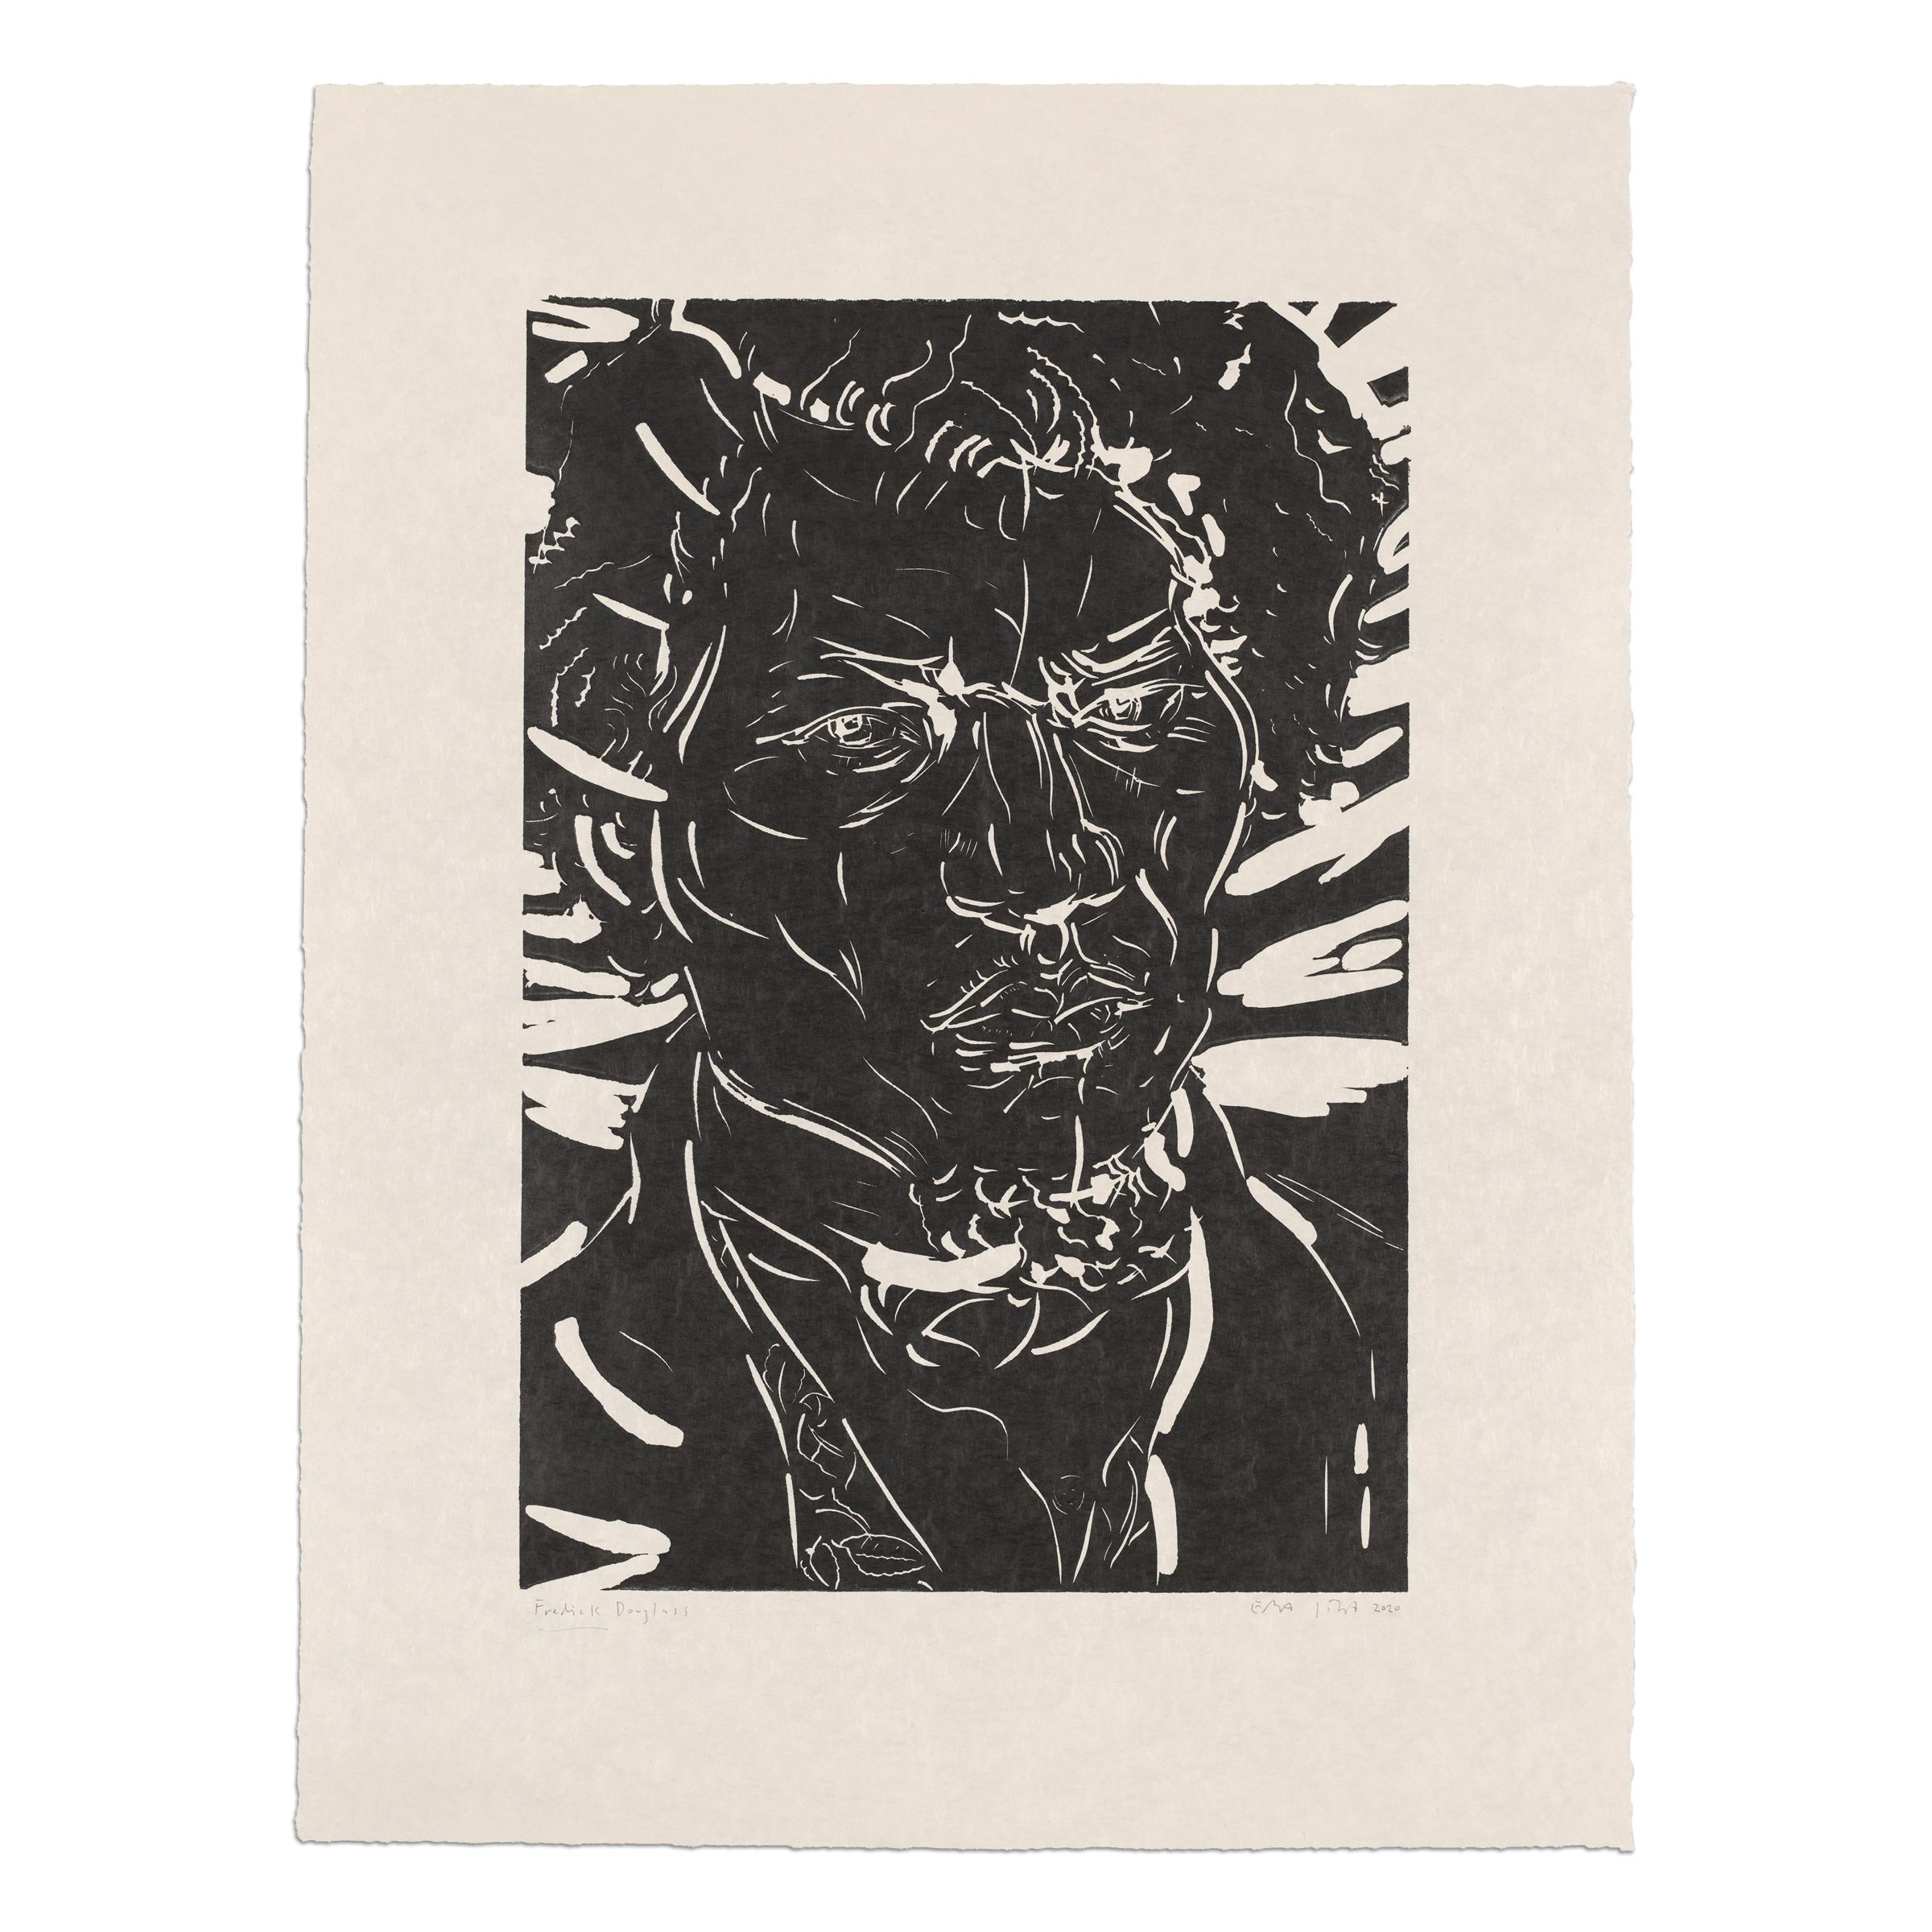 Elizabeth Peyton (American, b. 1965)
Frederick Douglass, 2023
Medium: Linocut print on Japan paper
Dimensions: 61 x 46 cm
Edition of 30: Hand-signed, numbered, titled and dated
Condition: Mint